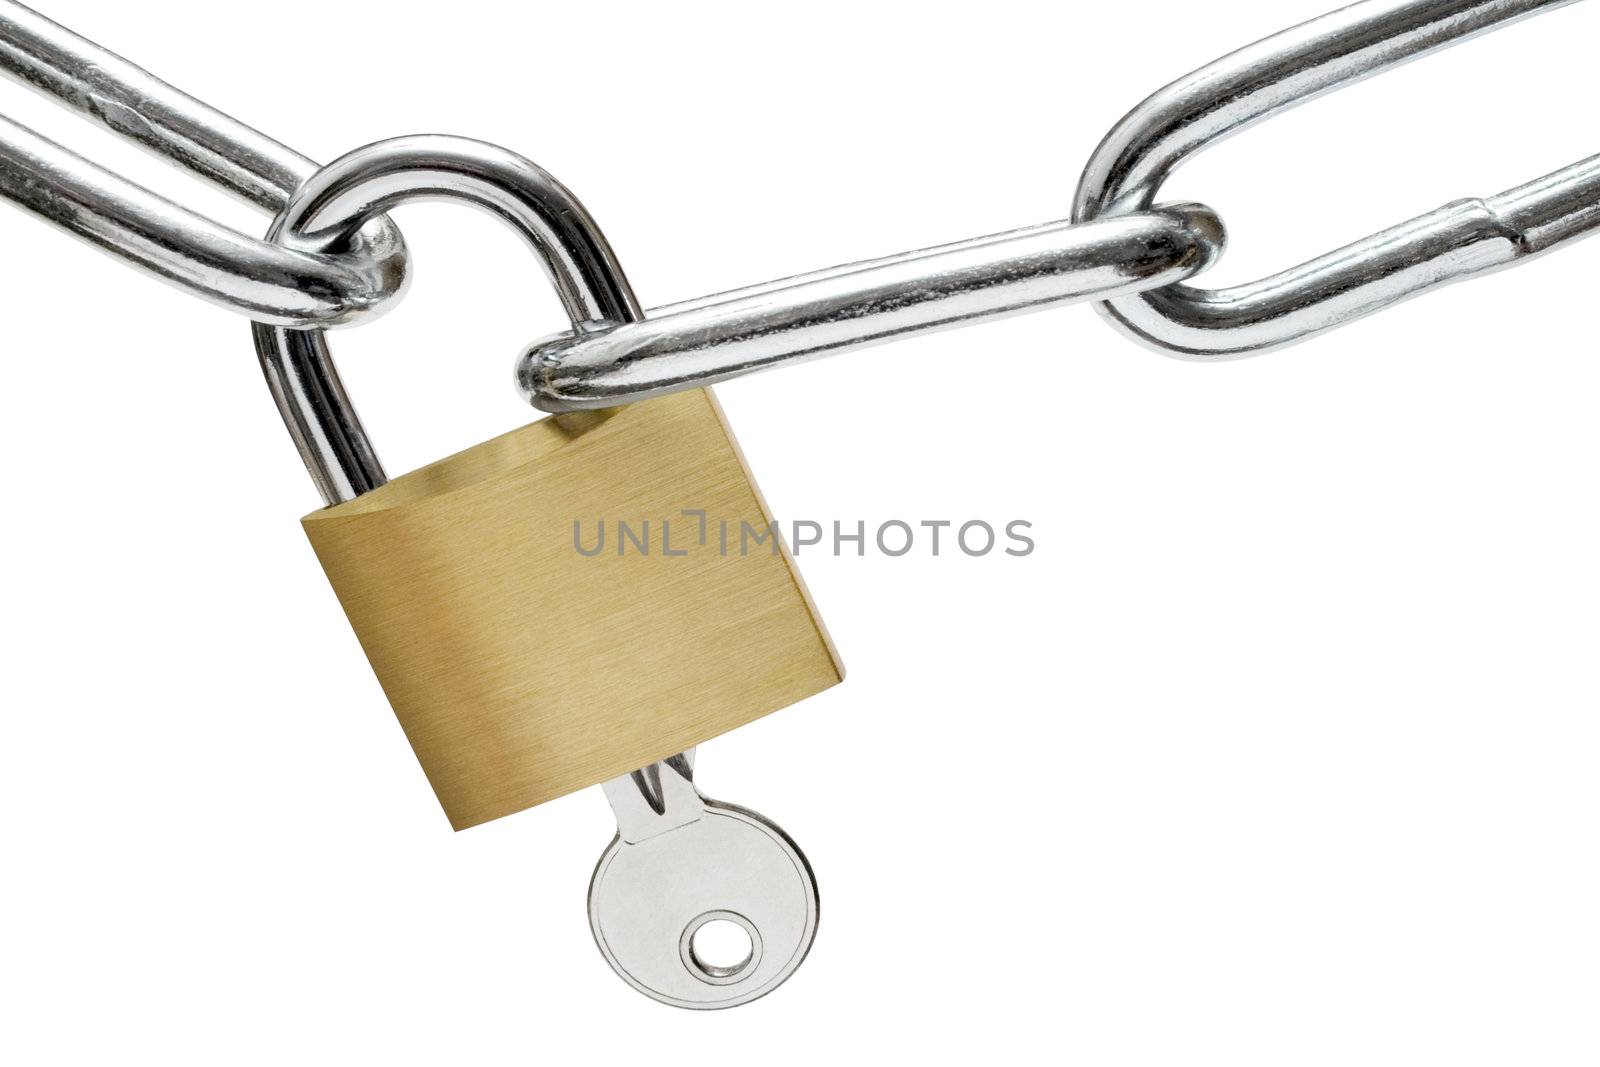 Common padlock with key and metal chain links isolated on a white background.